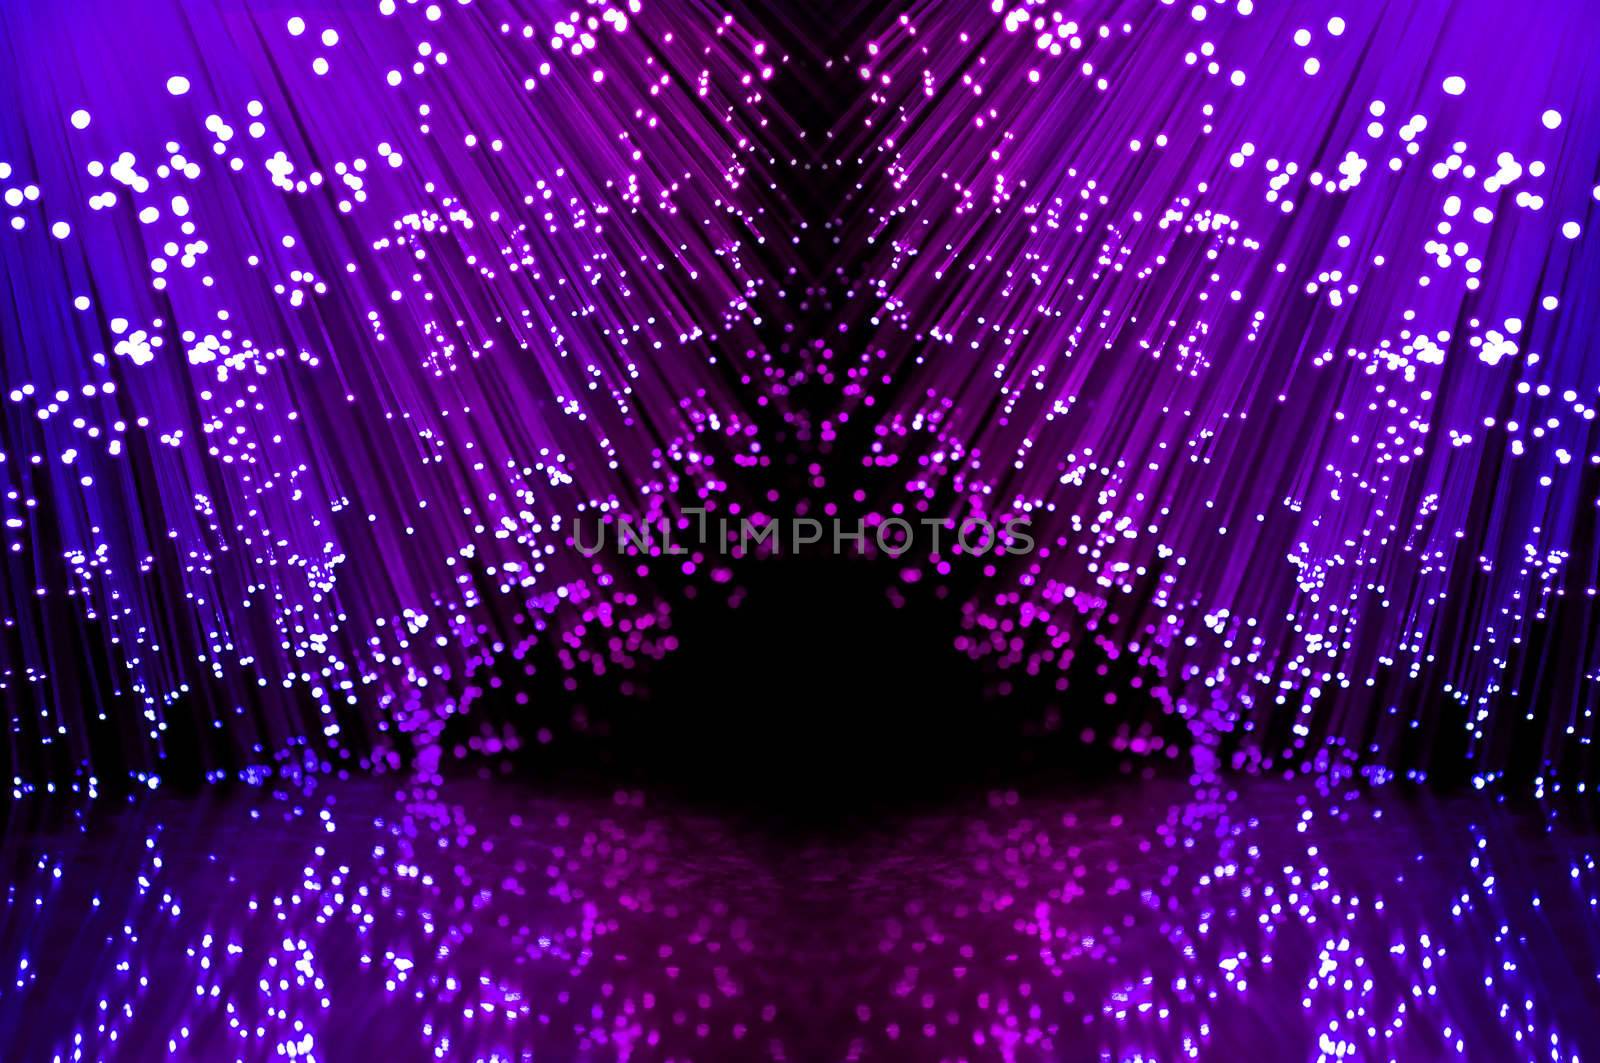 Close up on two groups of illuminated blue and magenta fiber optic light strands against a black background and reflecting into the foreground.